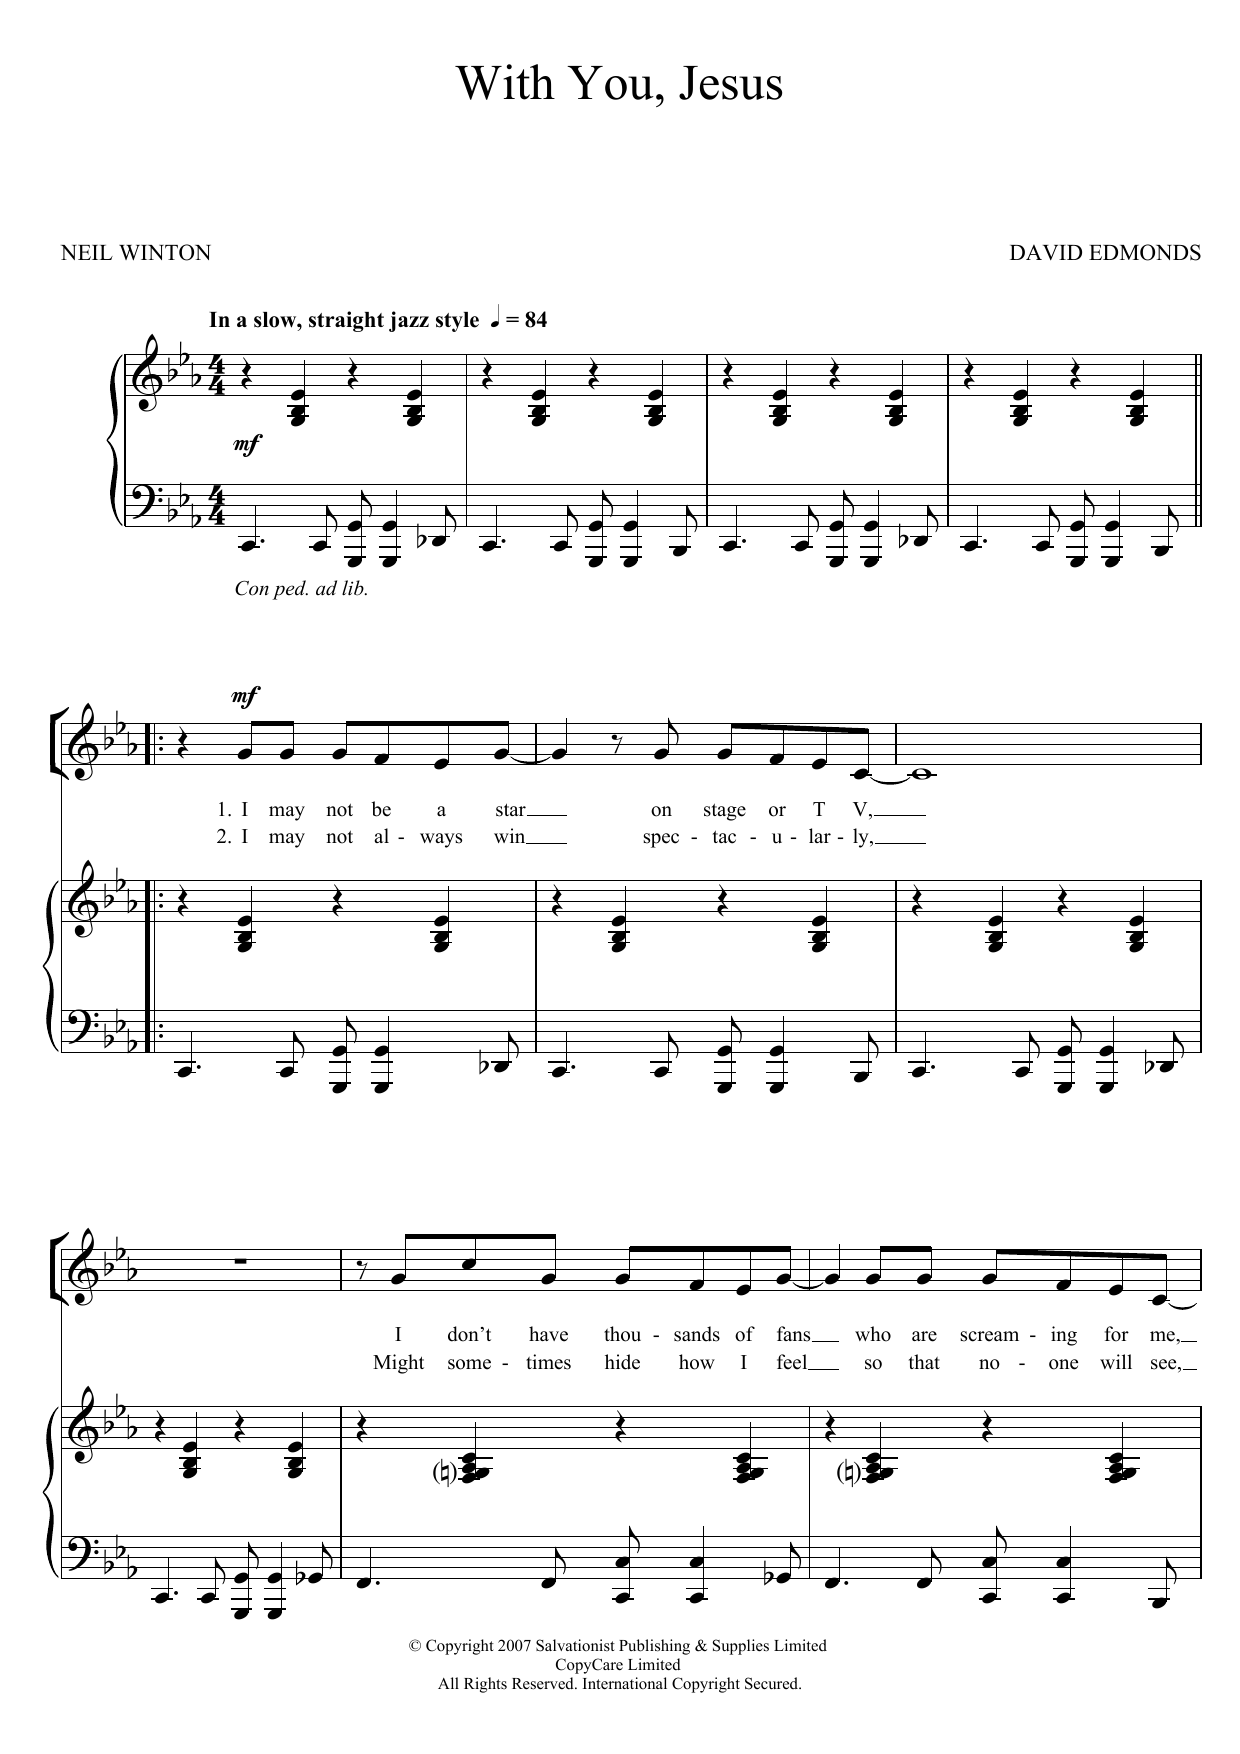 Download The Salvation Army With You, Jesus Sheet Music